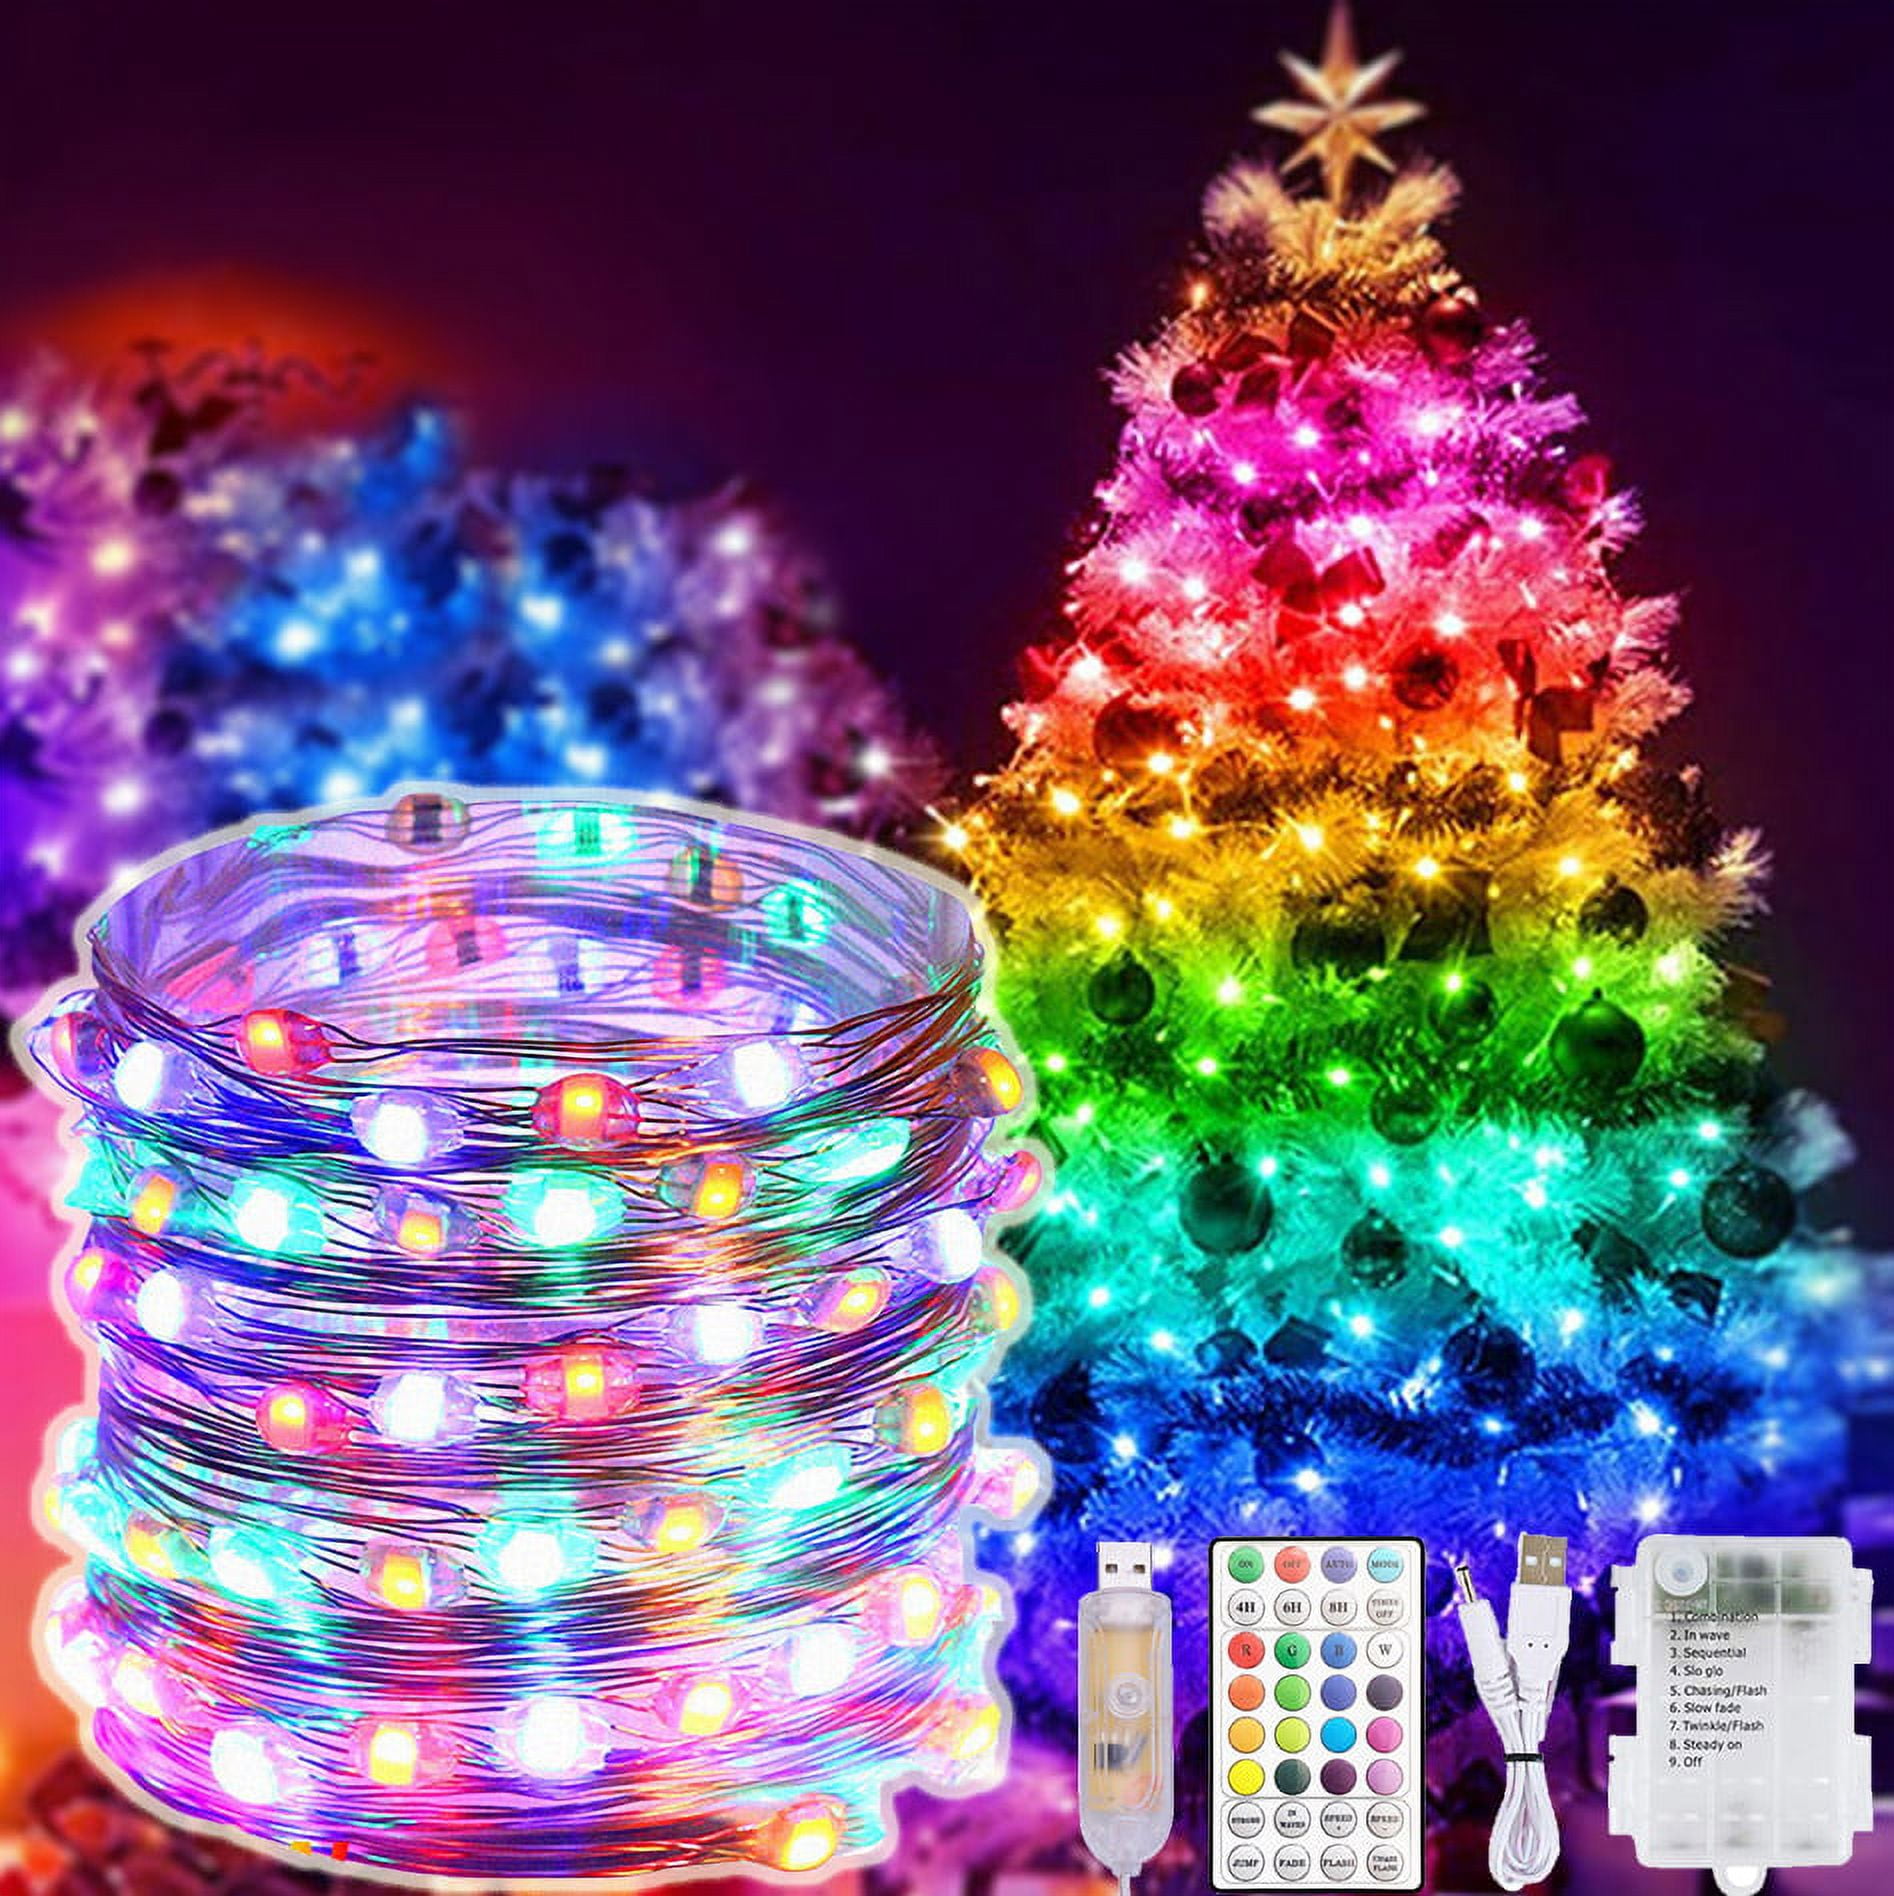 Multi-Colored String Lights,66Ft 200LEDs Color Changing Outdoor String  Lights Rope Lights For Christmas Decoration,Multi-Colored